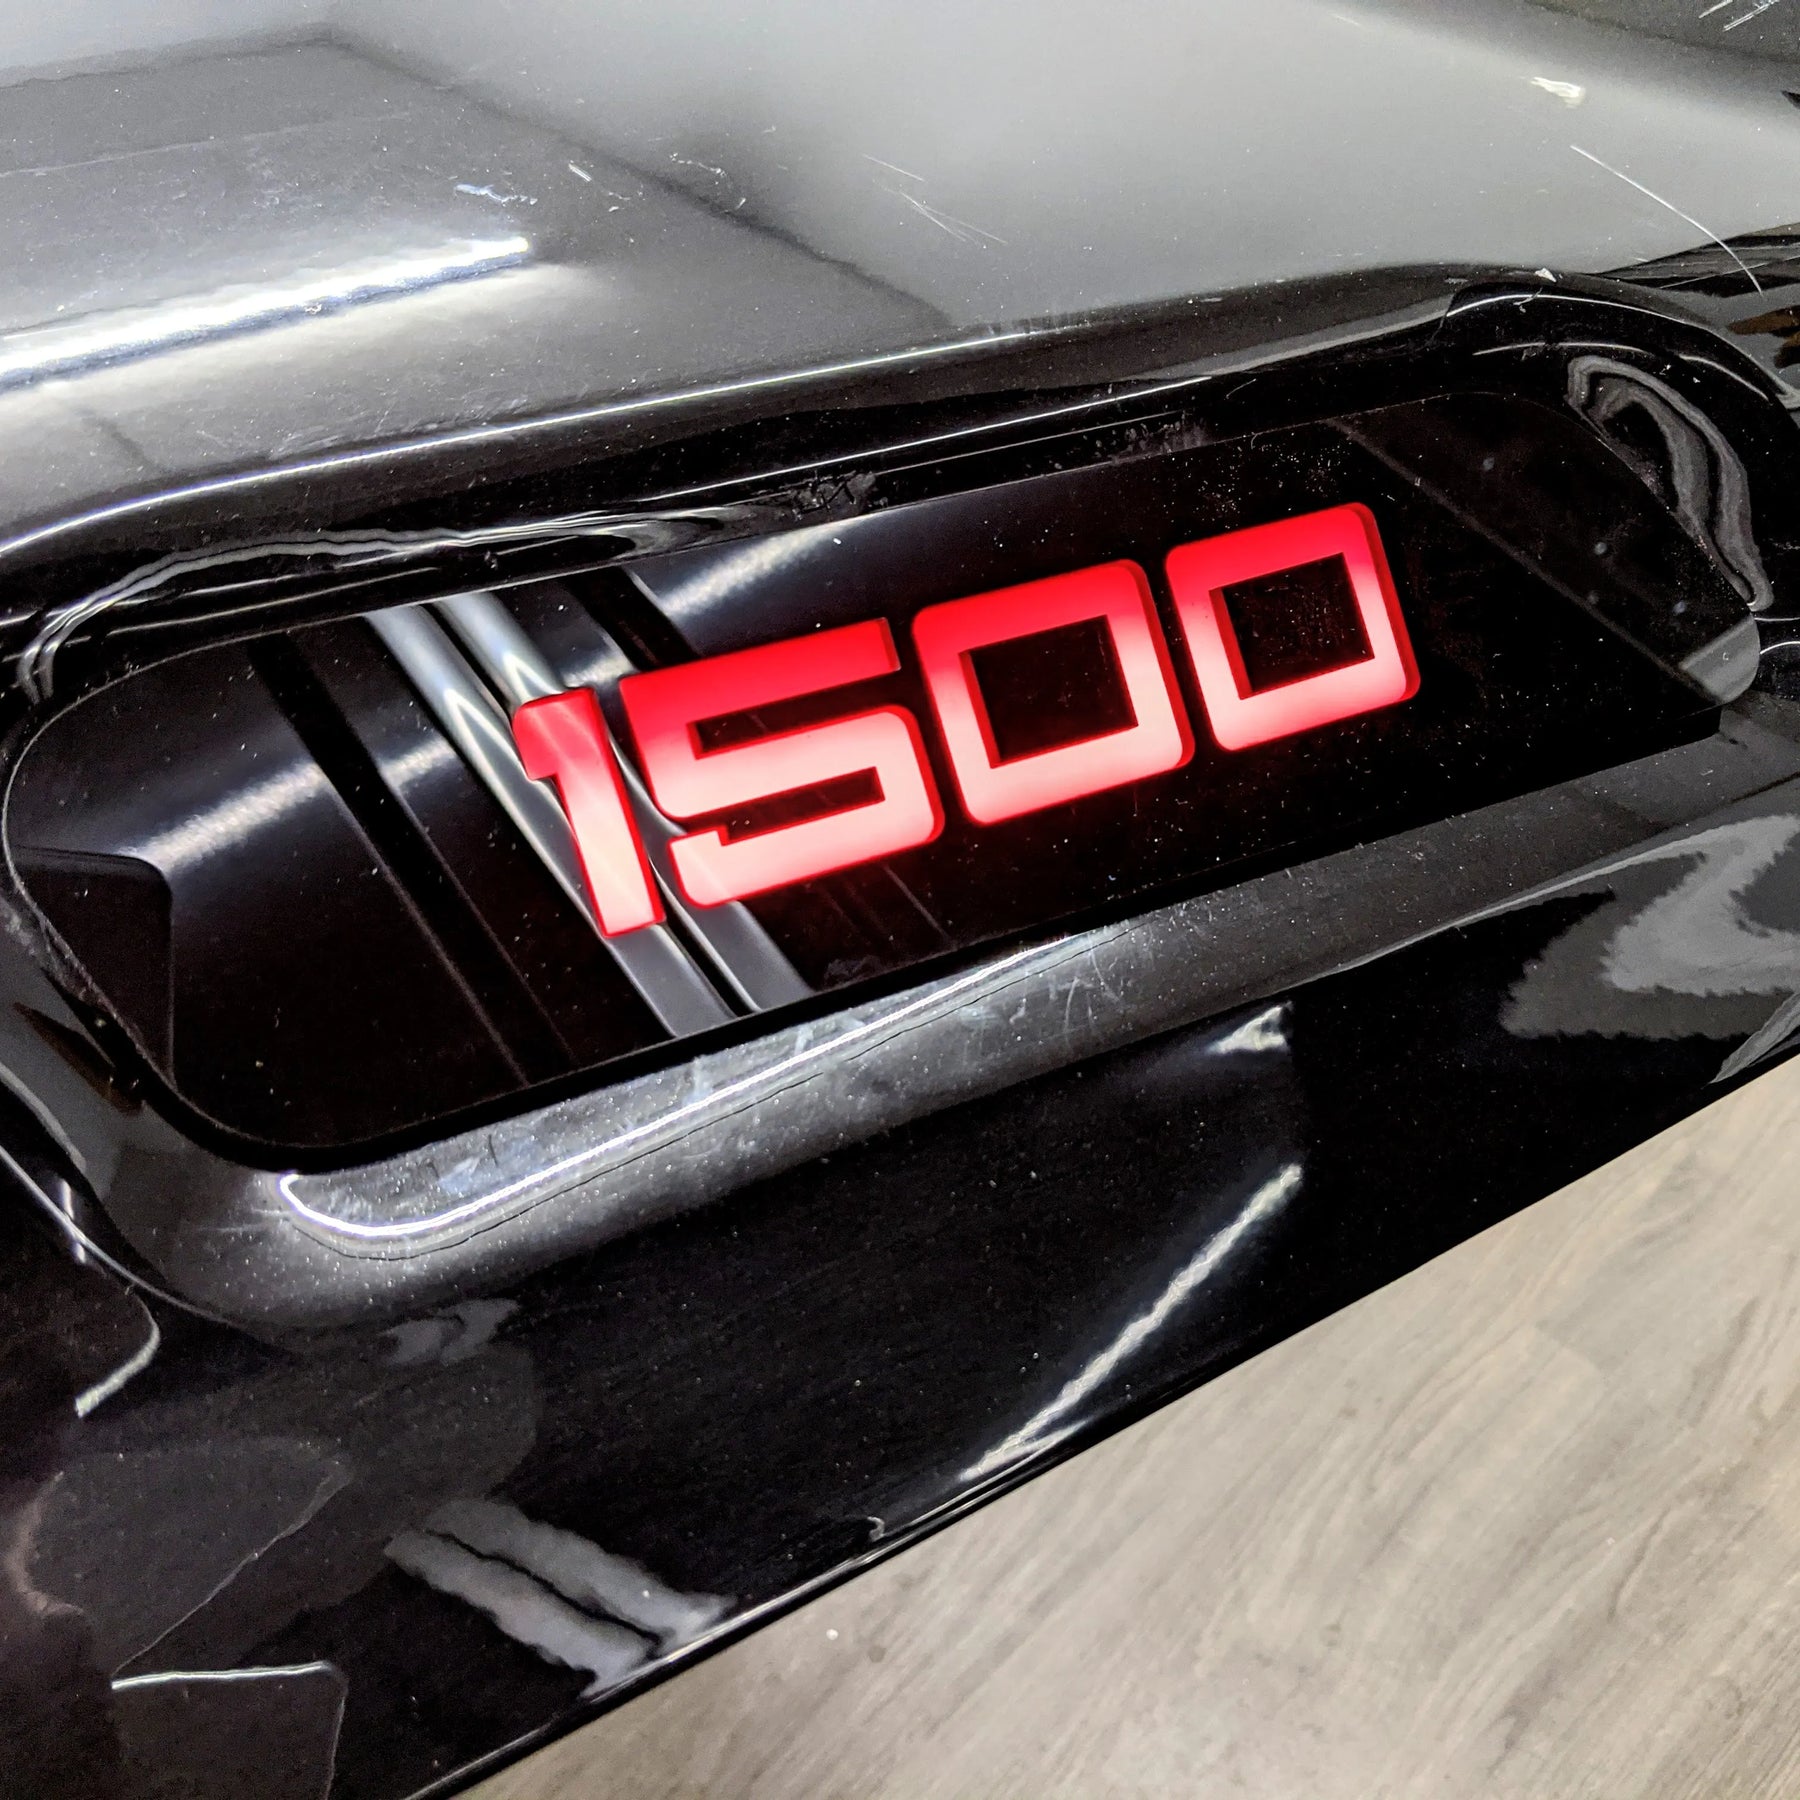 LED 1500 Hood Badges - Fits 2019-2023 Ram 1500® - Multiple Colors Available